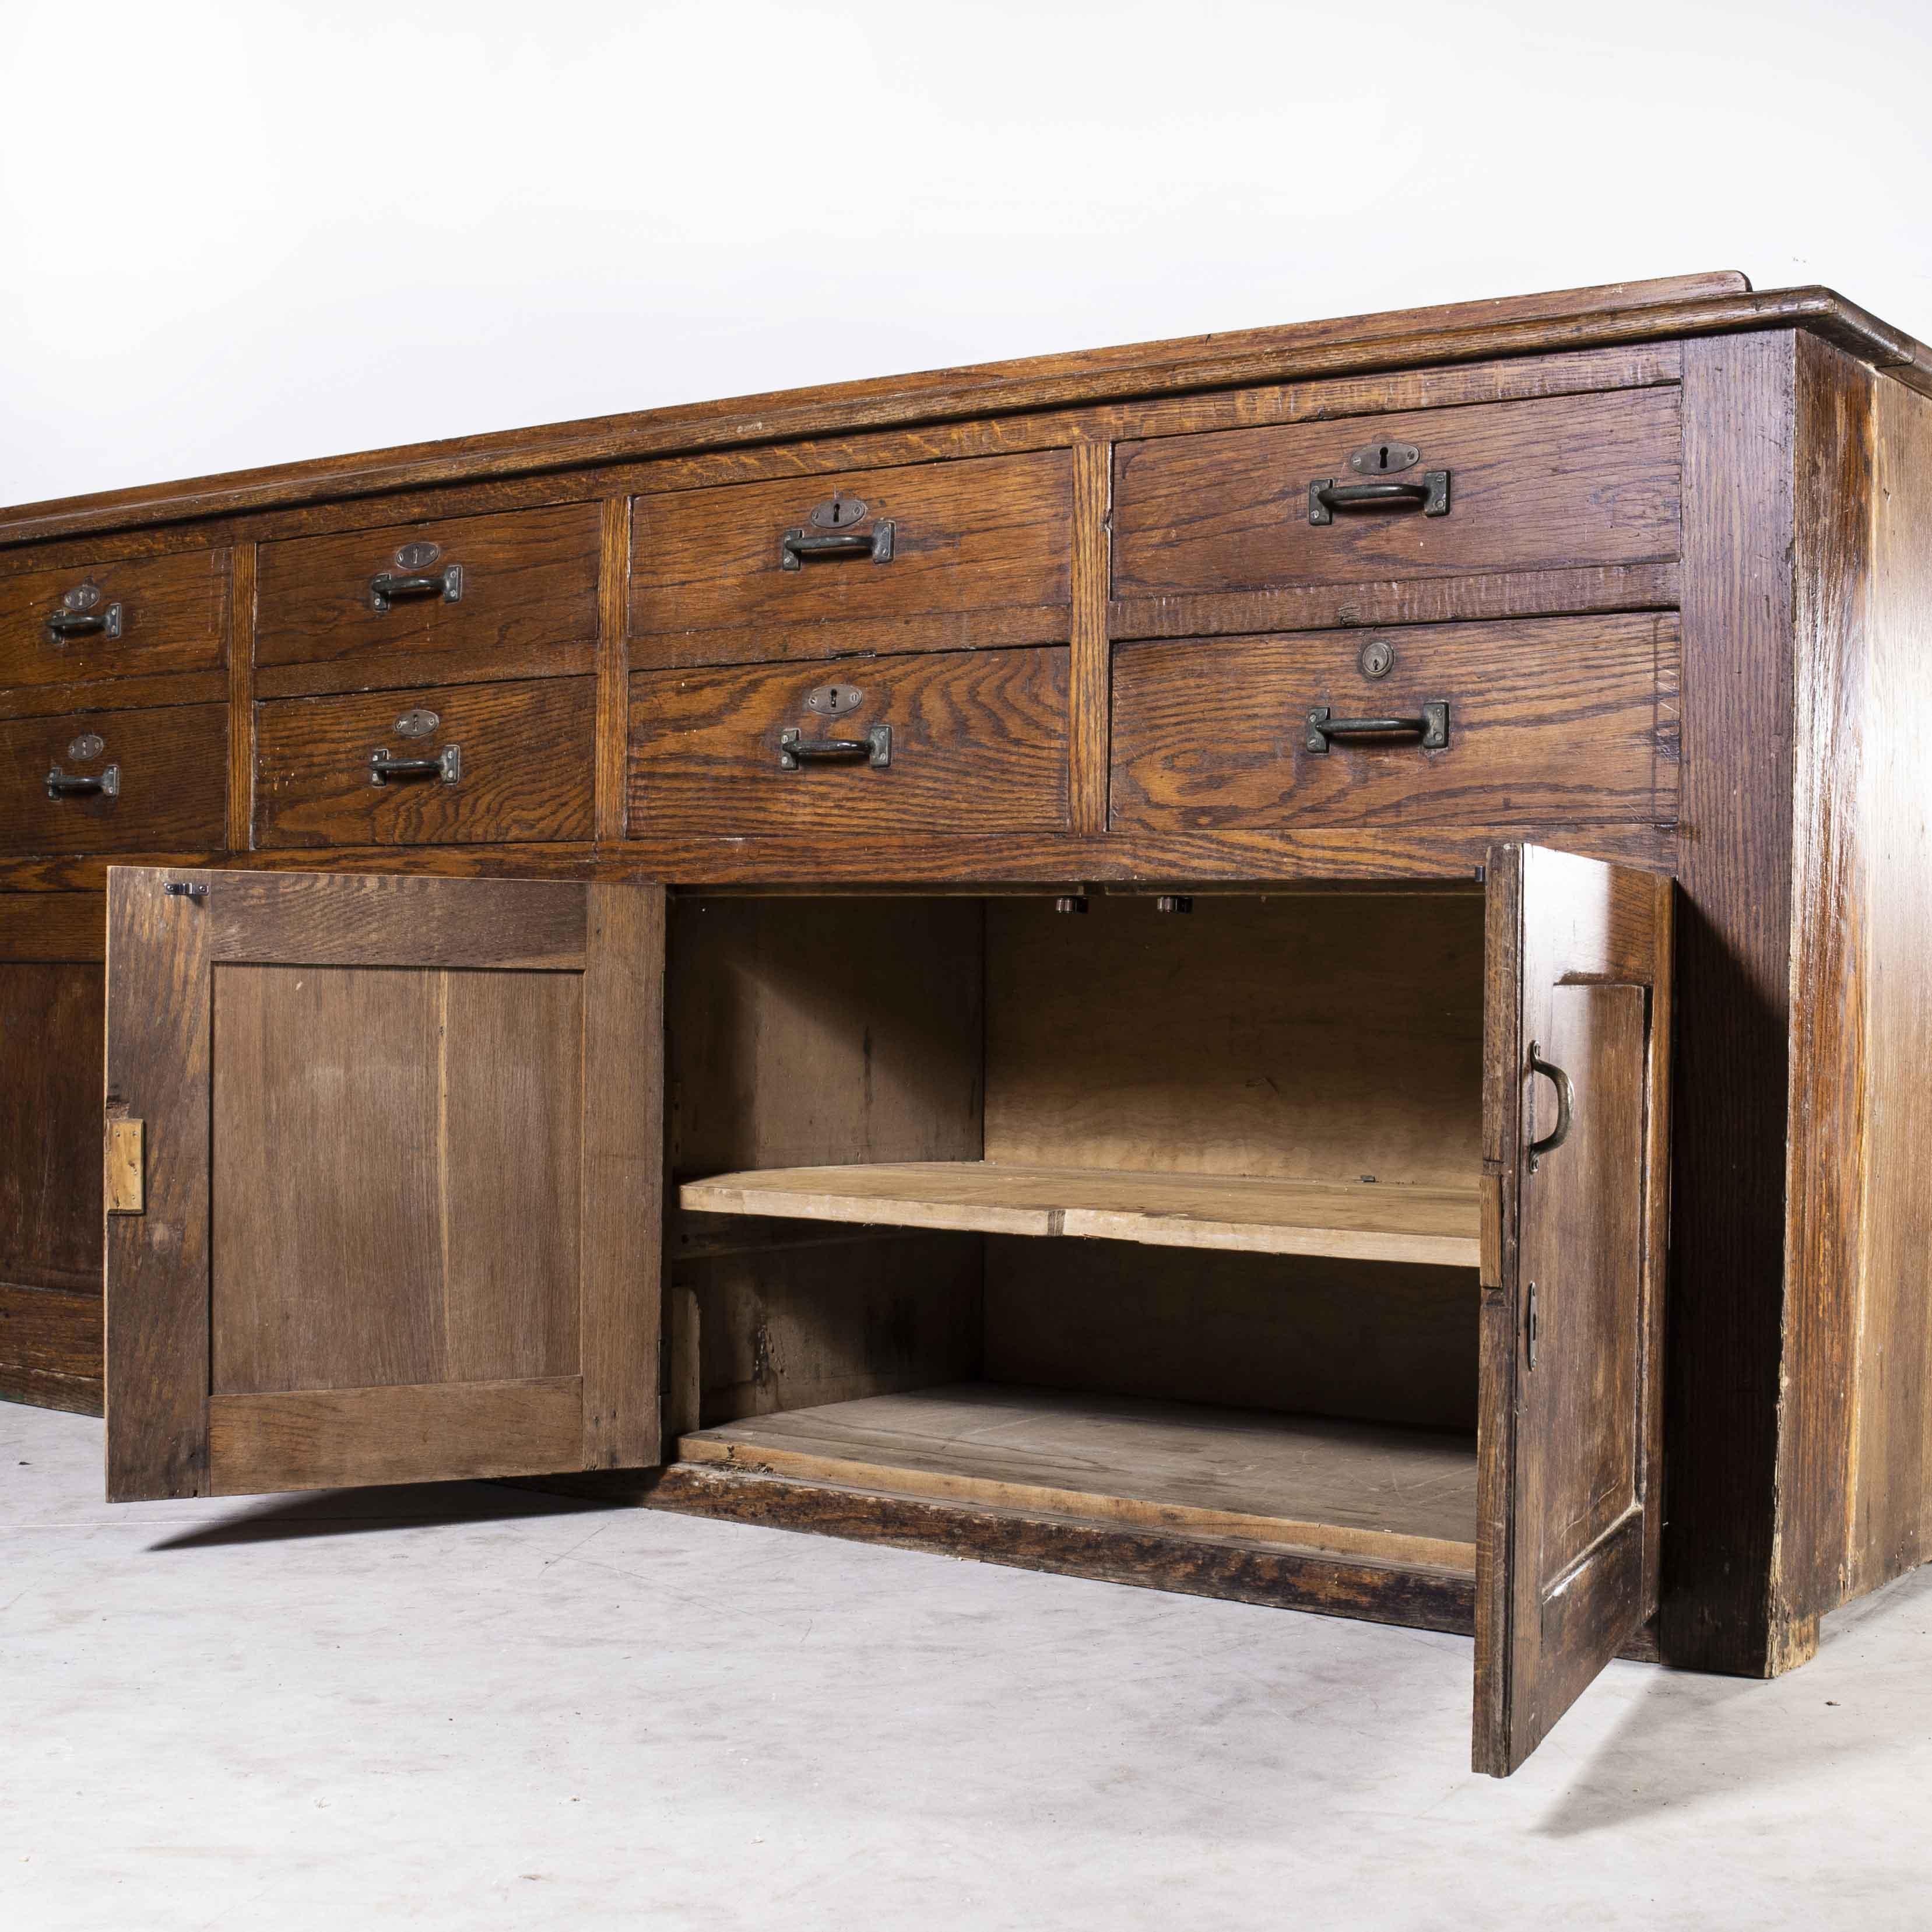 1920’s Large French oak kitchen dresser – Sideboard
1920’s Large French oak kitchen dresser – Sideboard. One of the best most original and well proportioned dressers we have come across. Made principally from solid oak the cabinet has a wonderful